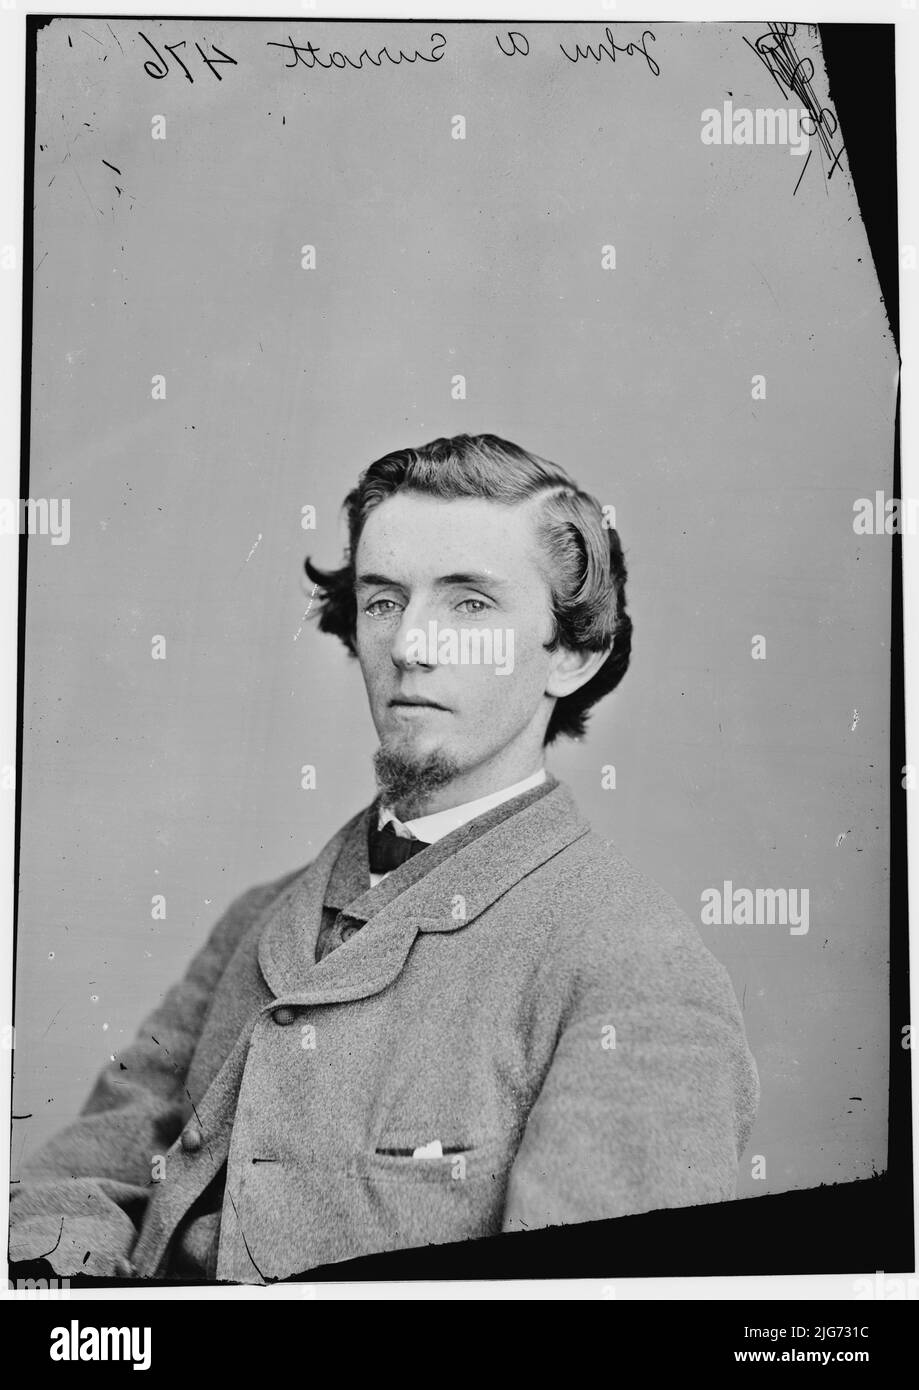 Surratt, John H., between 1870 and 1880. [Involved in an unsuccessful attempt to kidnap US President Abraham Lincoln with the intention of holding him for ransom in exchange for the release of Confederate prisoners of war. His mother, Mary Surratt, was executed for her involvement in the assassination of Lincoln, having given the conspirators accommodation in her boarding house. Surratt denied any involvement in the assassination plot, but fled overseas to avoid arrest. He was apprehended by US officials in Alexandria, Egypt, in November 1866 and was extradited to the United States for trial. Stock Photo